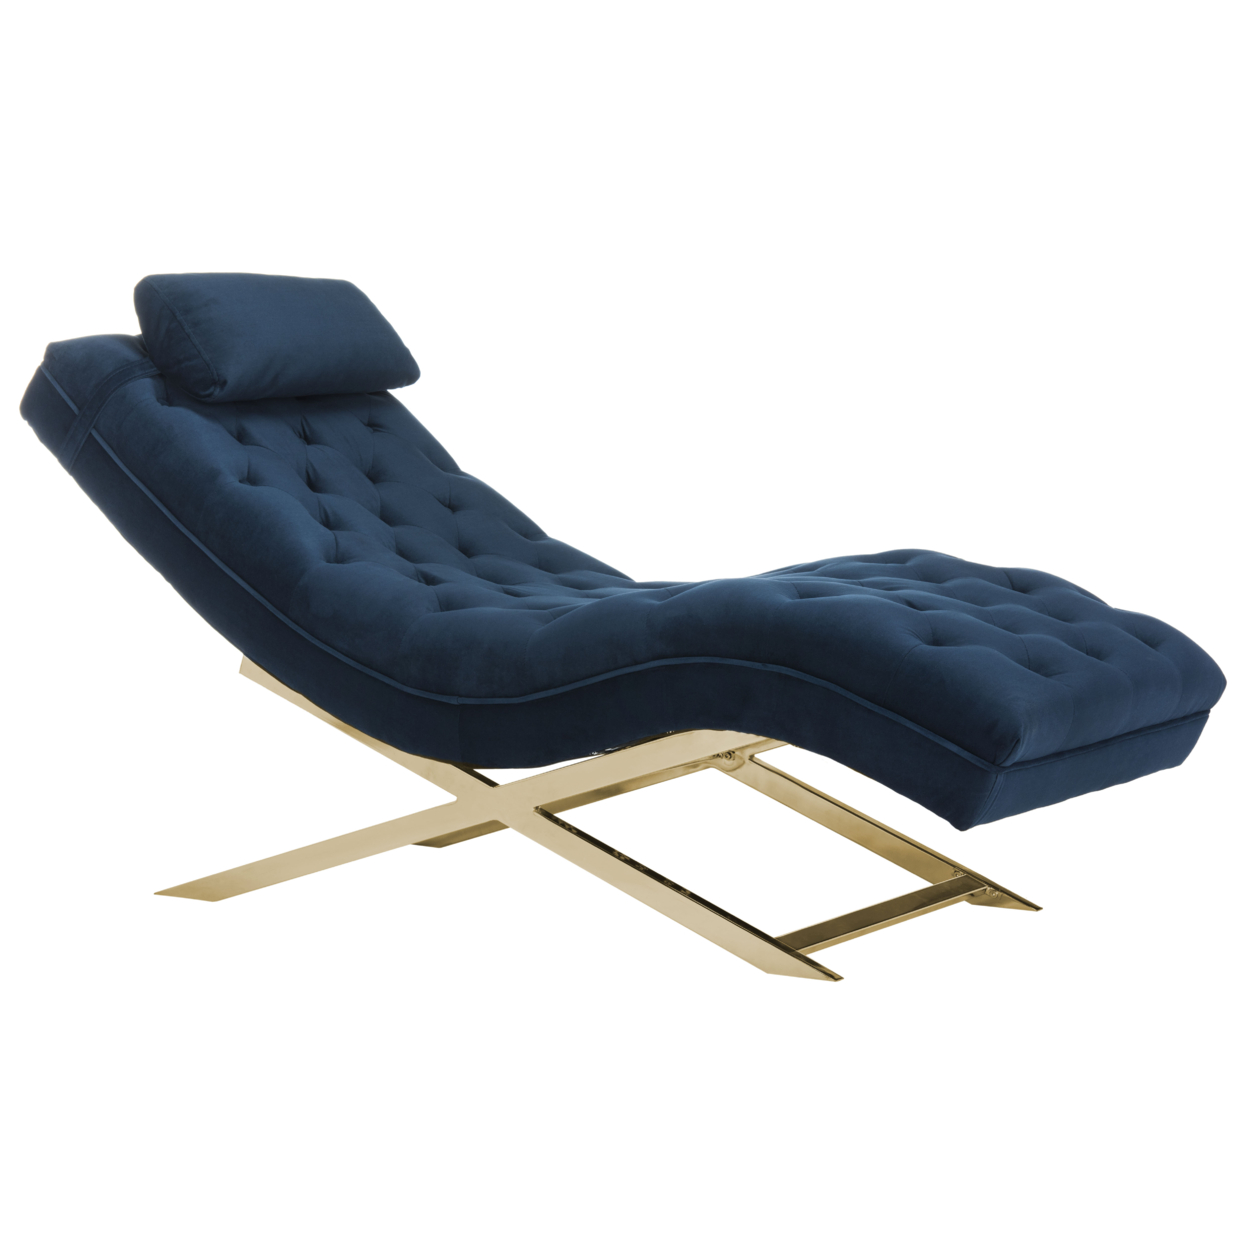 SAFAVIEH Monroe Chaise With Headrest Pillow Navy / Gold